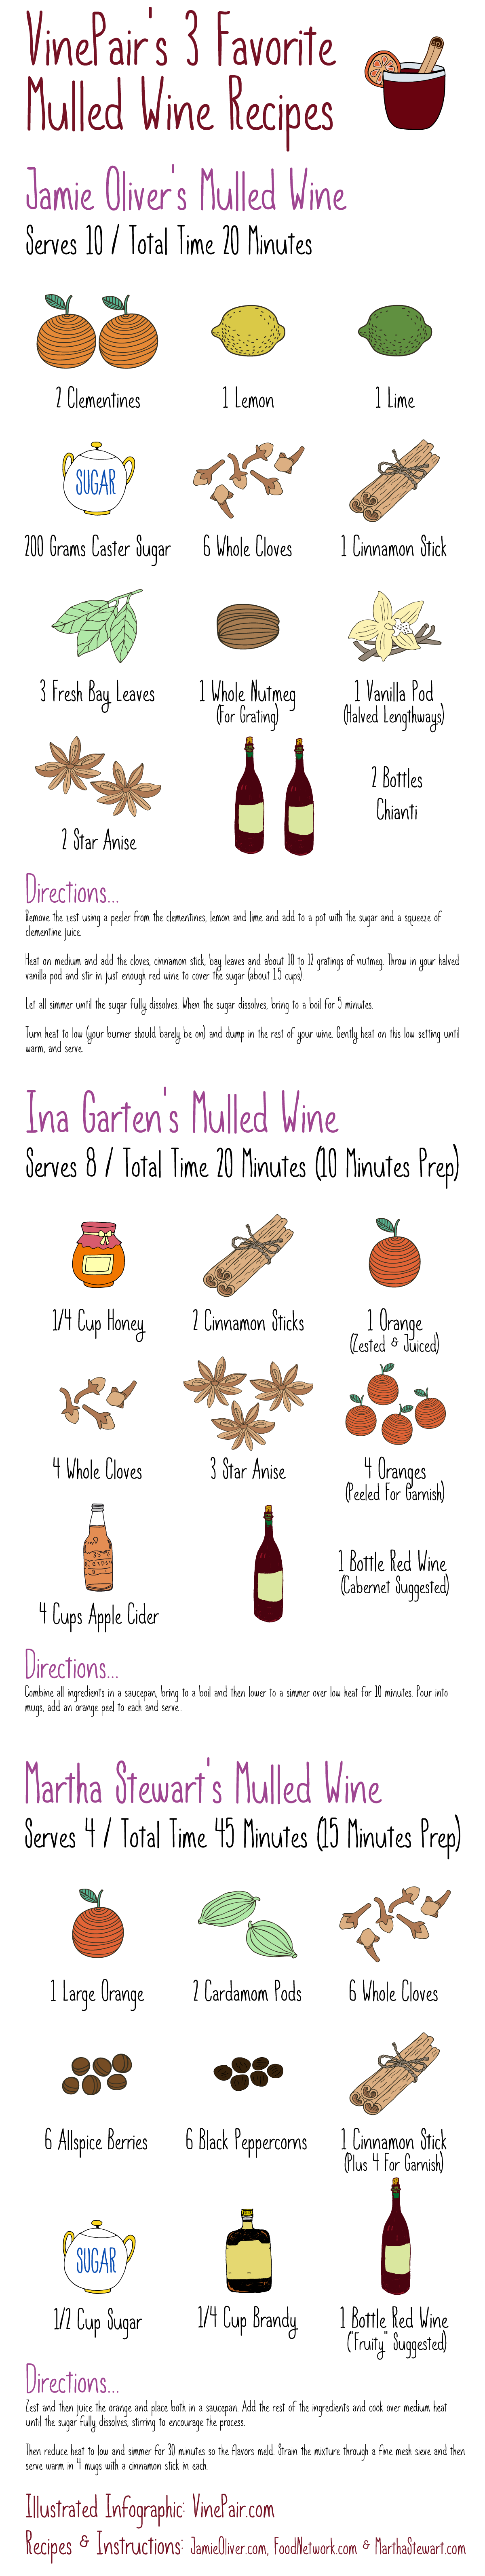 Illustrated Infographic: 3 Of Our Favorite Mulled Wine Recipes 